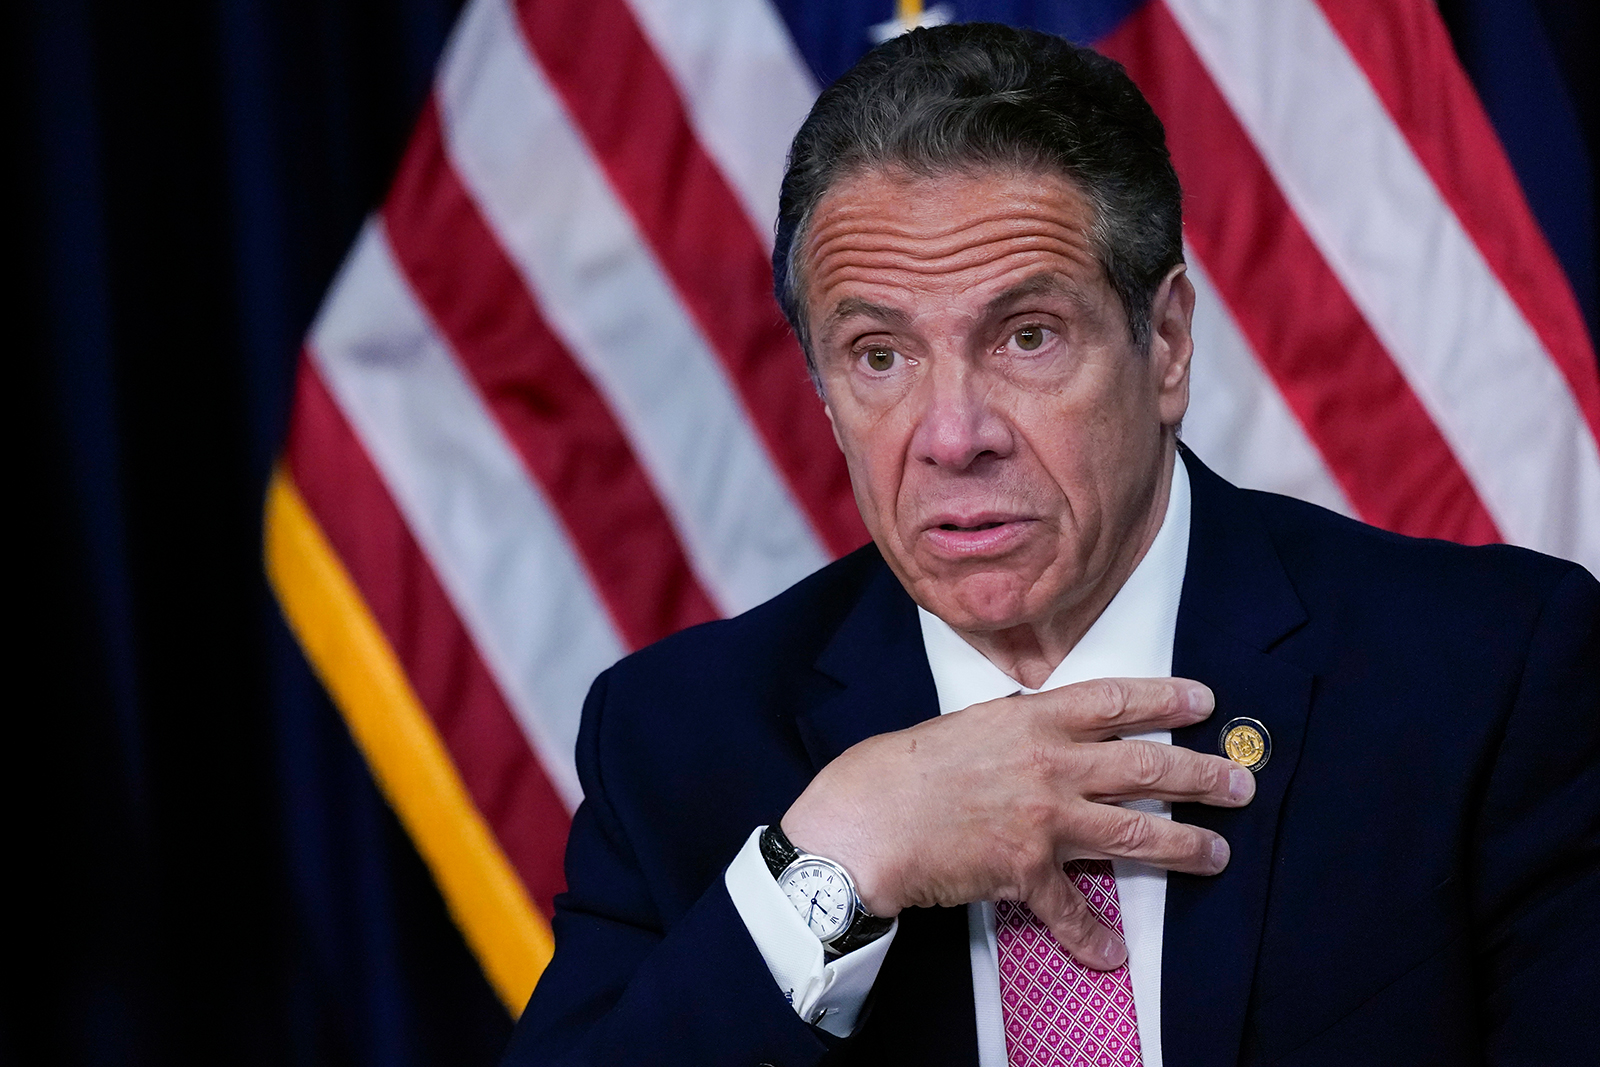 New York Gov. Andrew Cuomo speaks during a news conference on Monday, May 10, in New York.